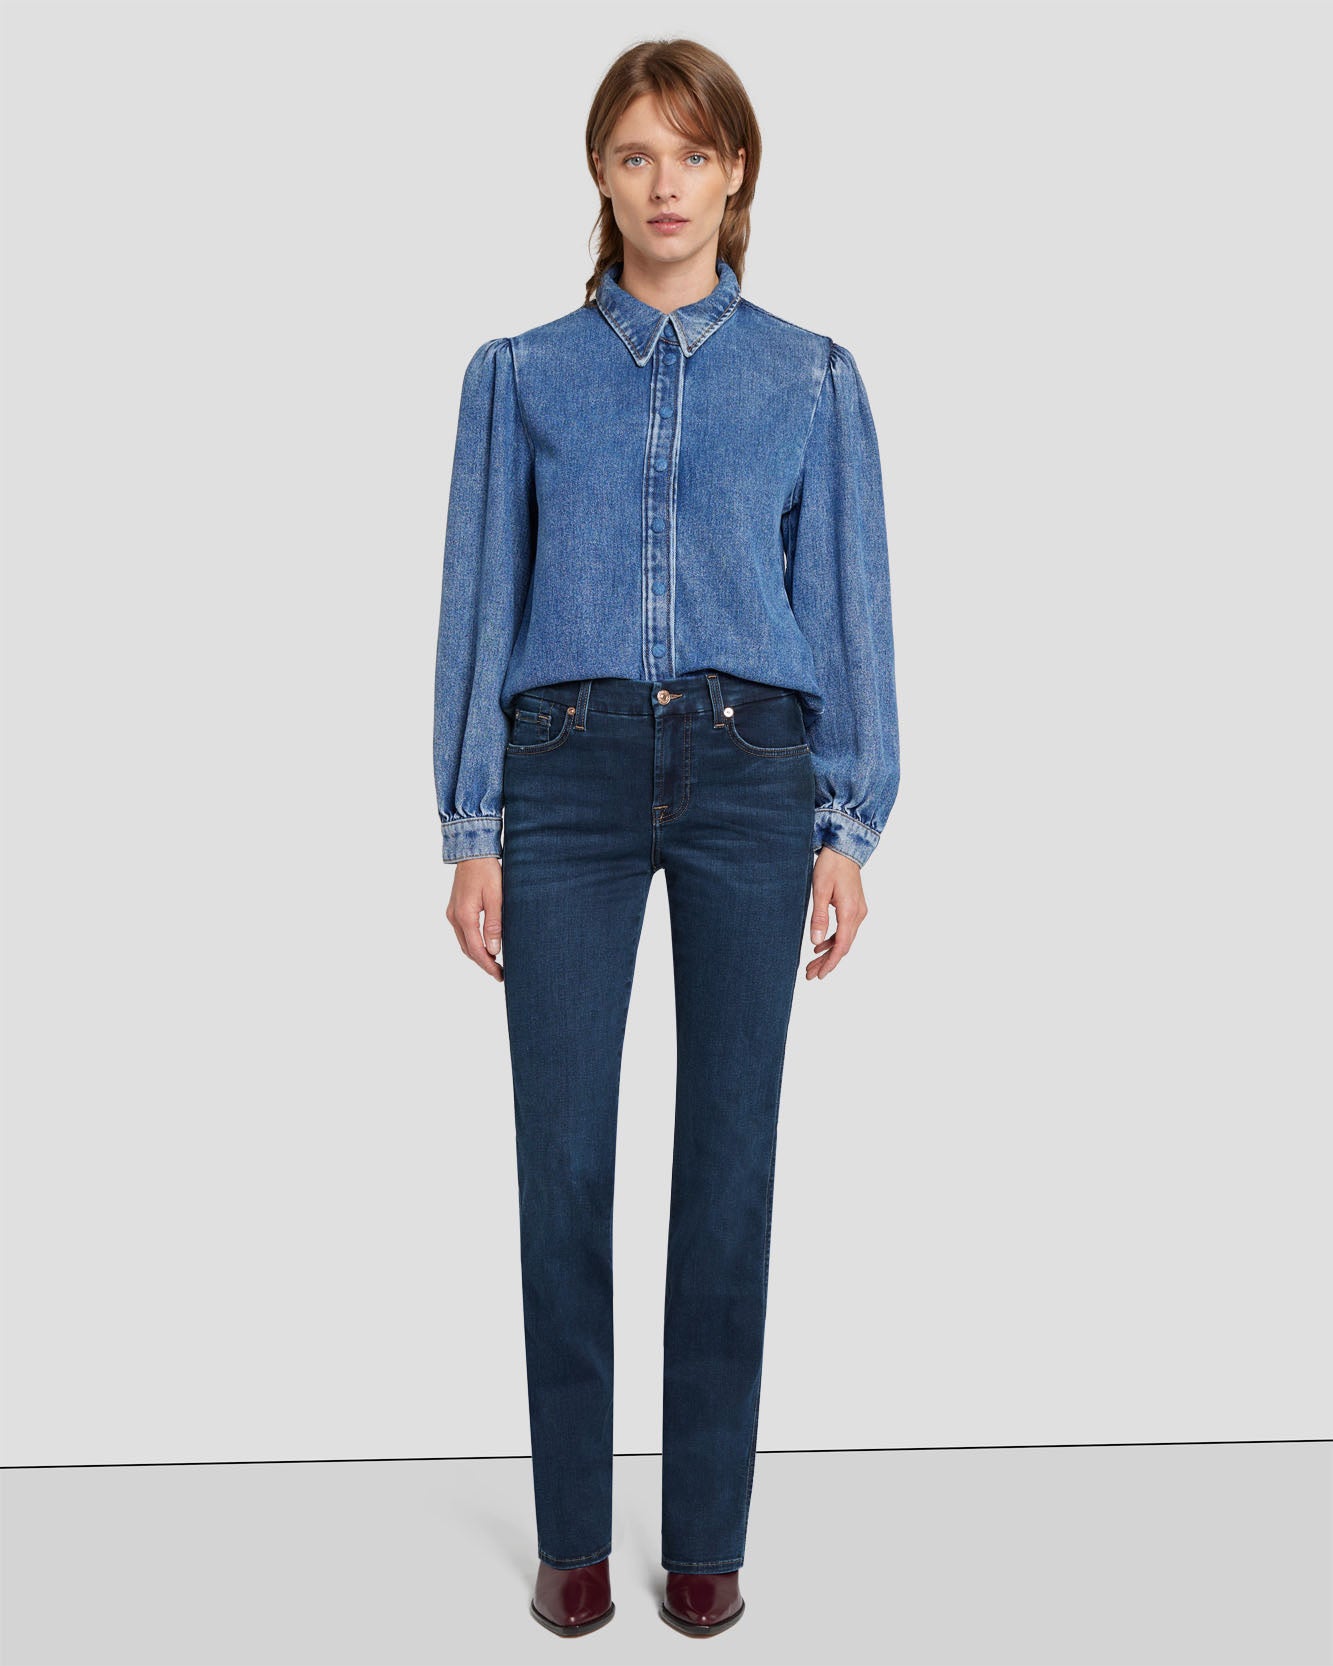 B(air) Kimmie Straight in Rinsed Indigo | 7 For All Mankind